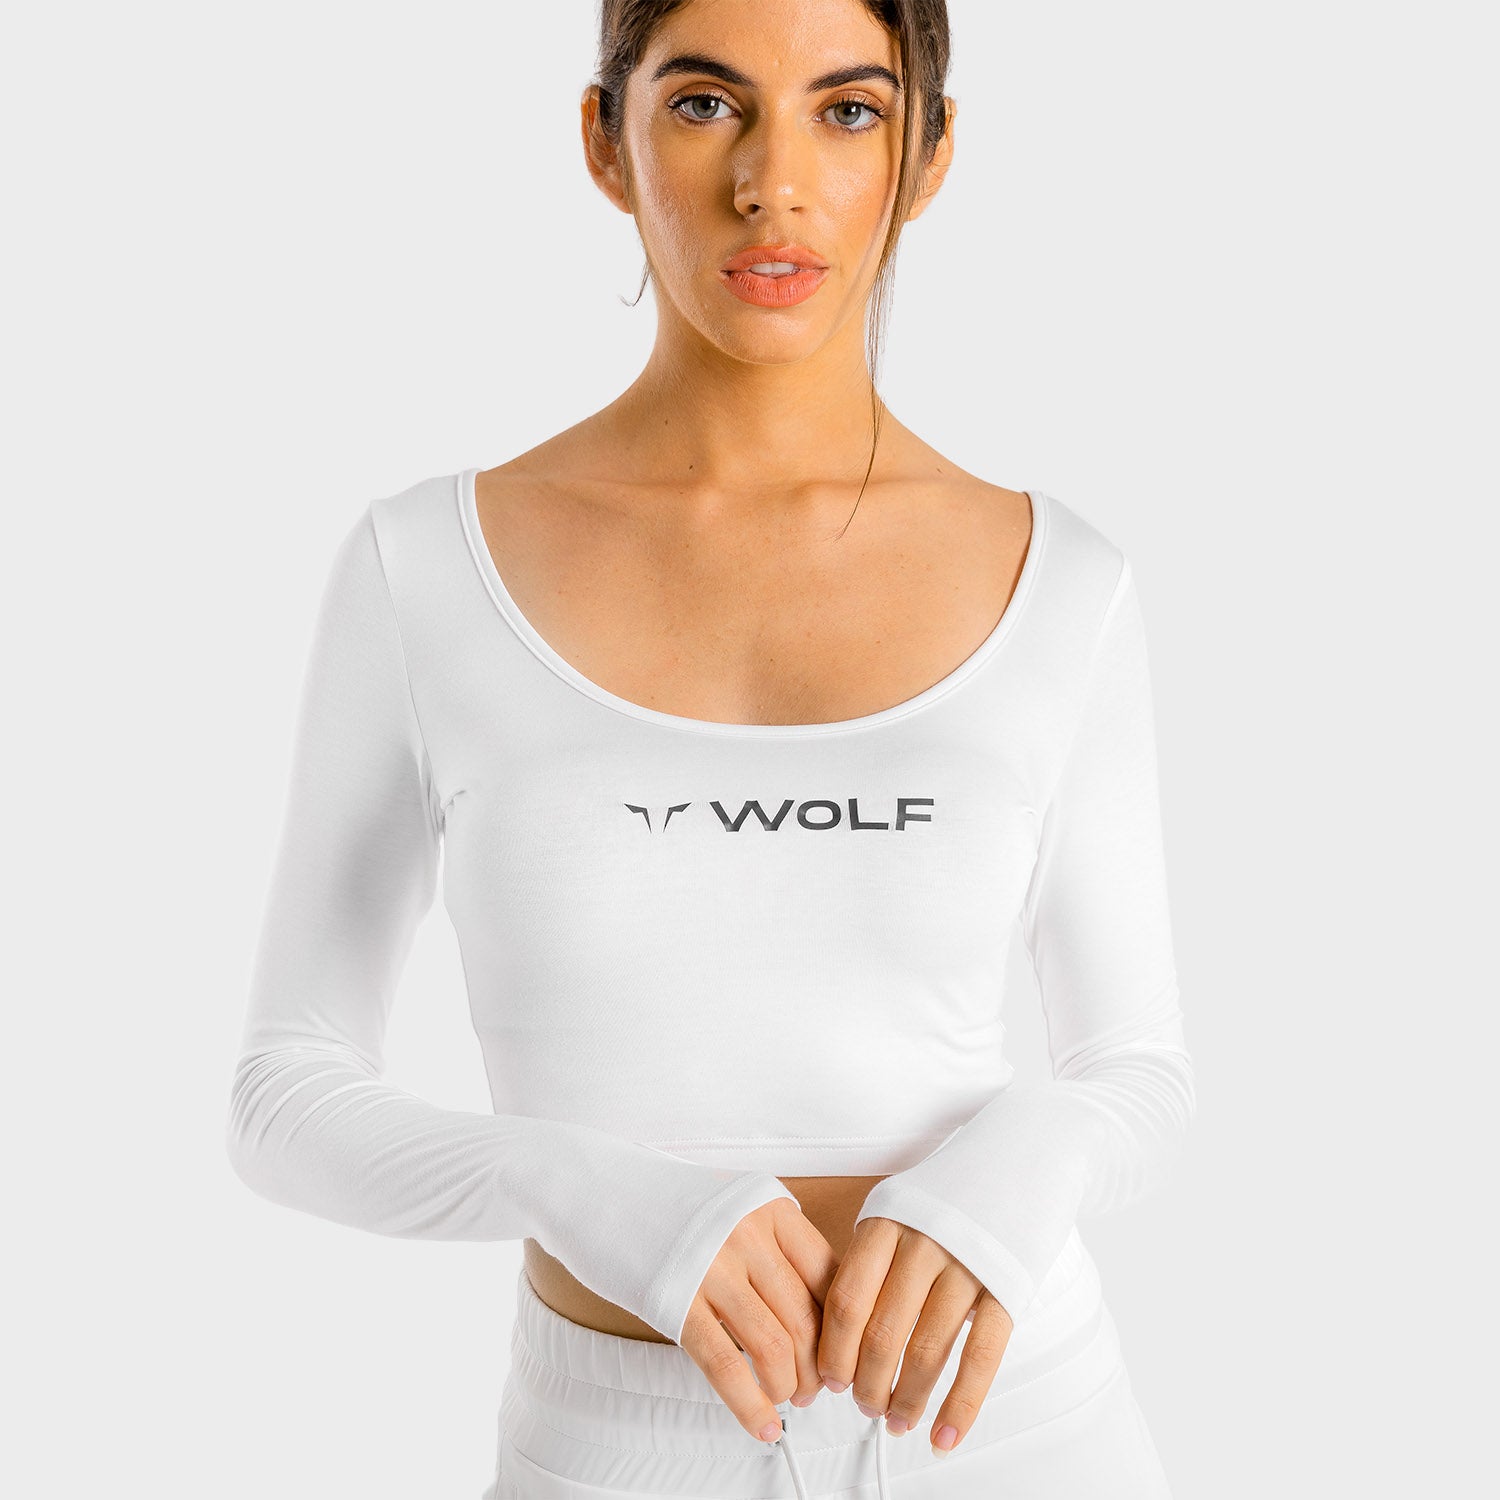 squatwolf-gym-t-shirts-for-women-primal-crop-tee-pearl-white-workout-clothes